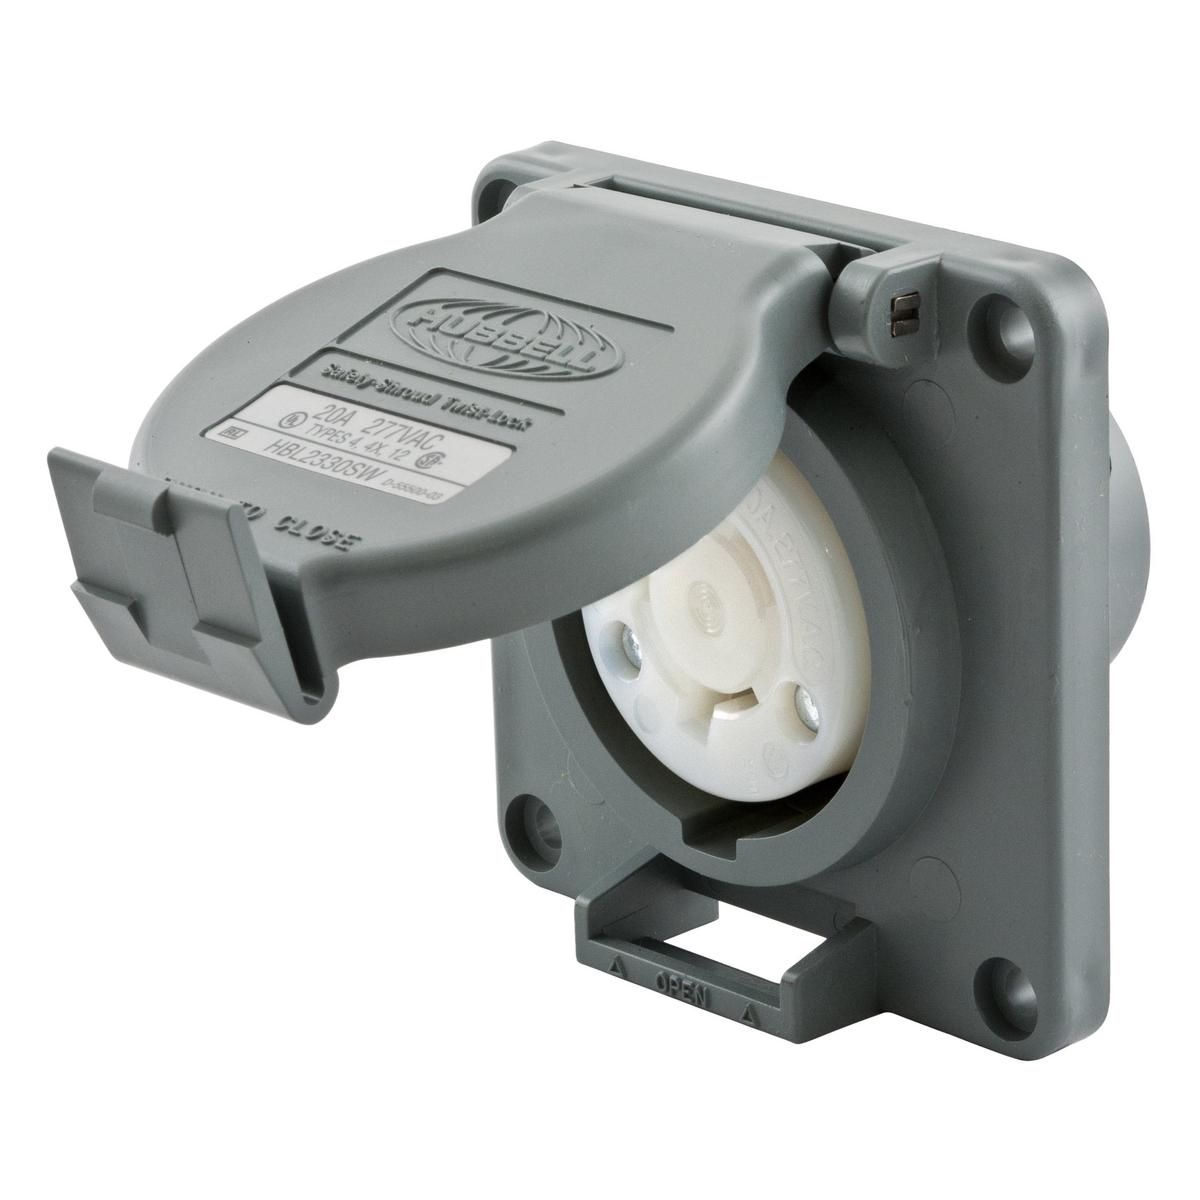 Hubbell HBL2330SW Locking Devices, Twist-Lock®, Watertight Safety-Shroud®, Receptacle, 20A 277V AC, 2-Pole 3-Wire Grounding, NEMA L7-20R, Screw Terminal, PBT housing and flange, Gray.  ; High impact, thermoplastic housing for heavy-duty industrial environments ; Alignment 